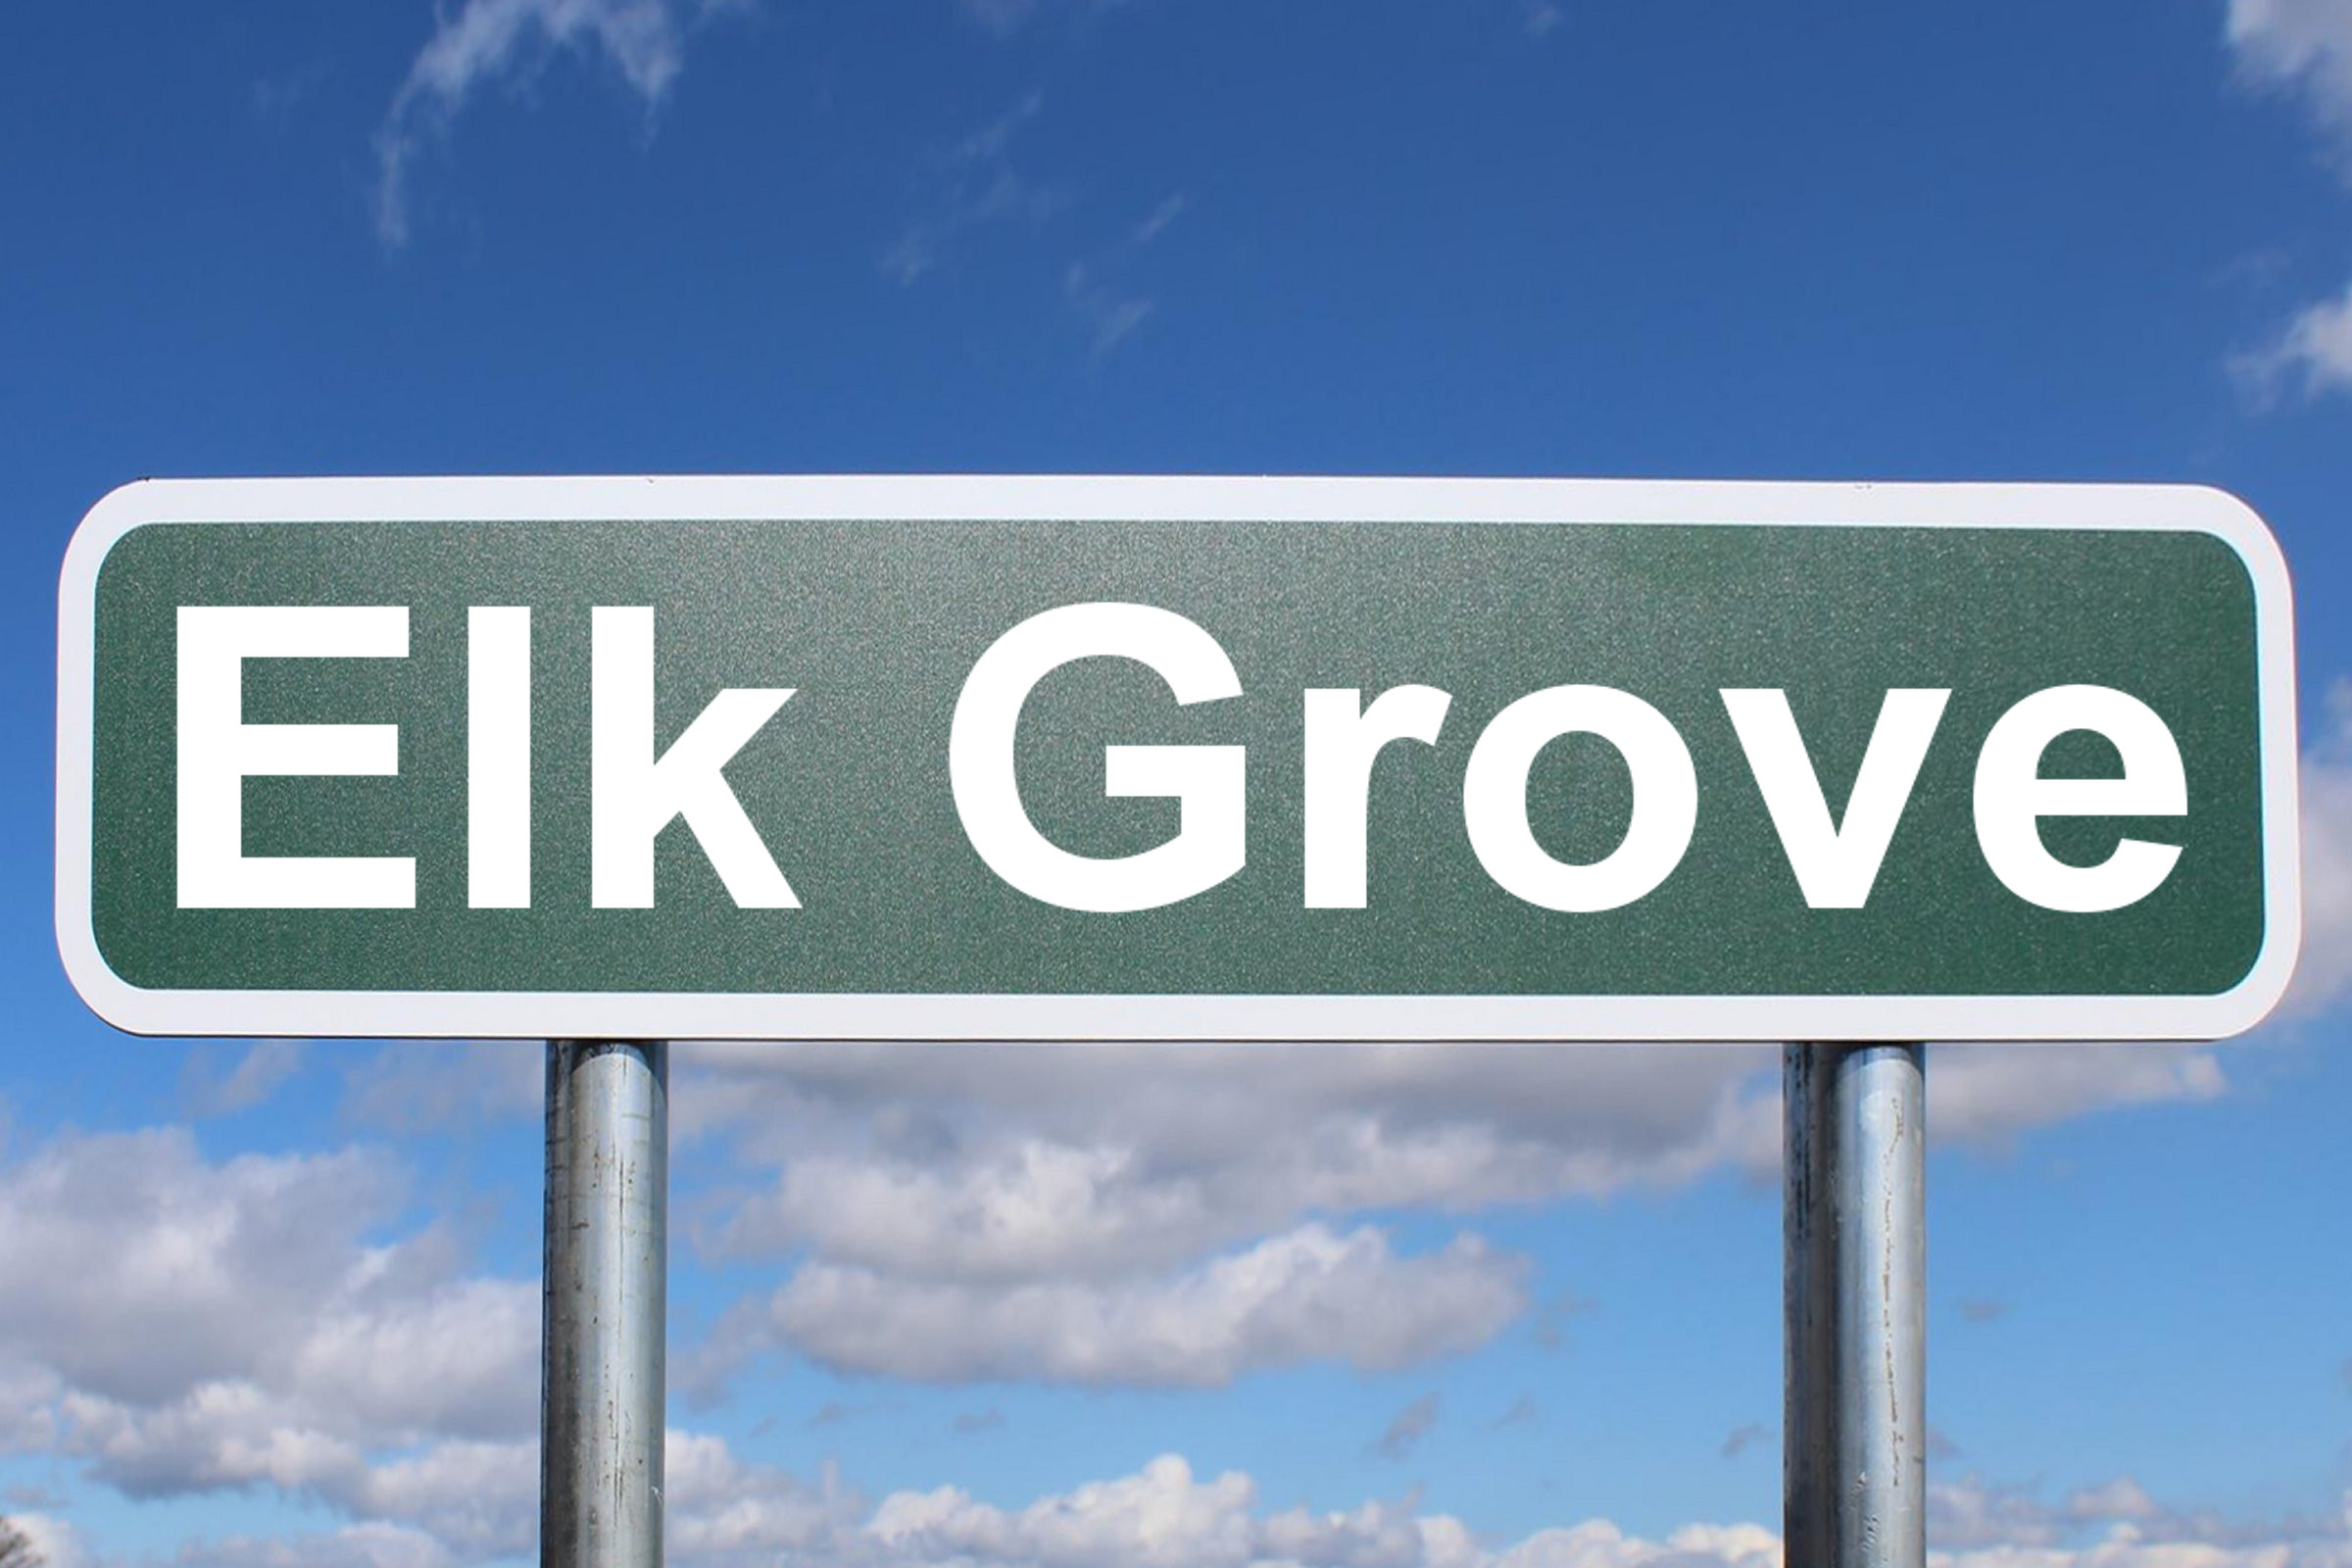 Elk Grove Free of Charge Creative Commons Highway sign image